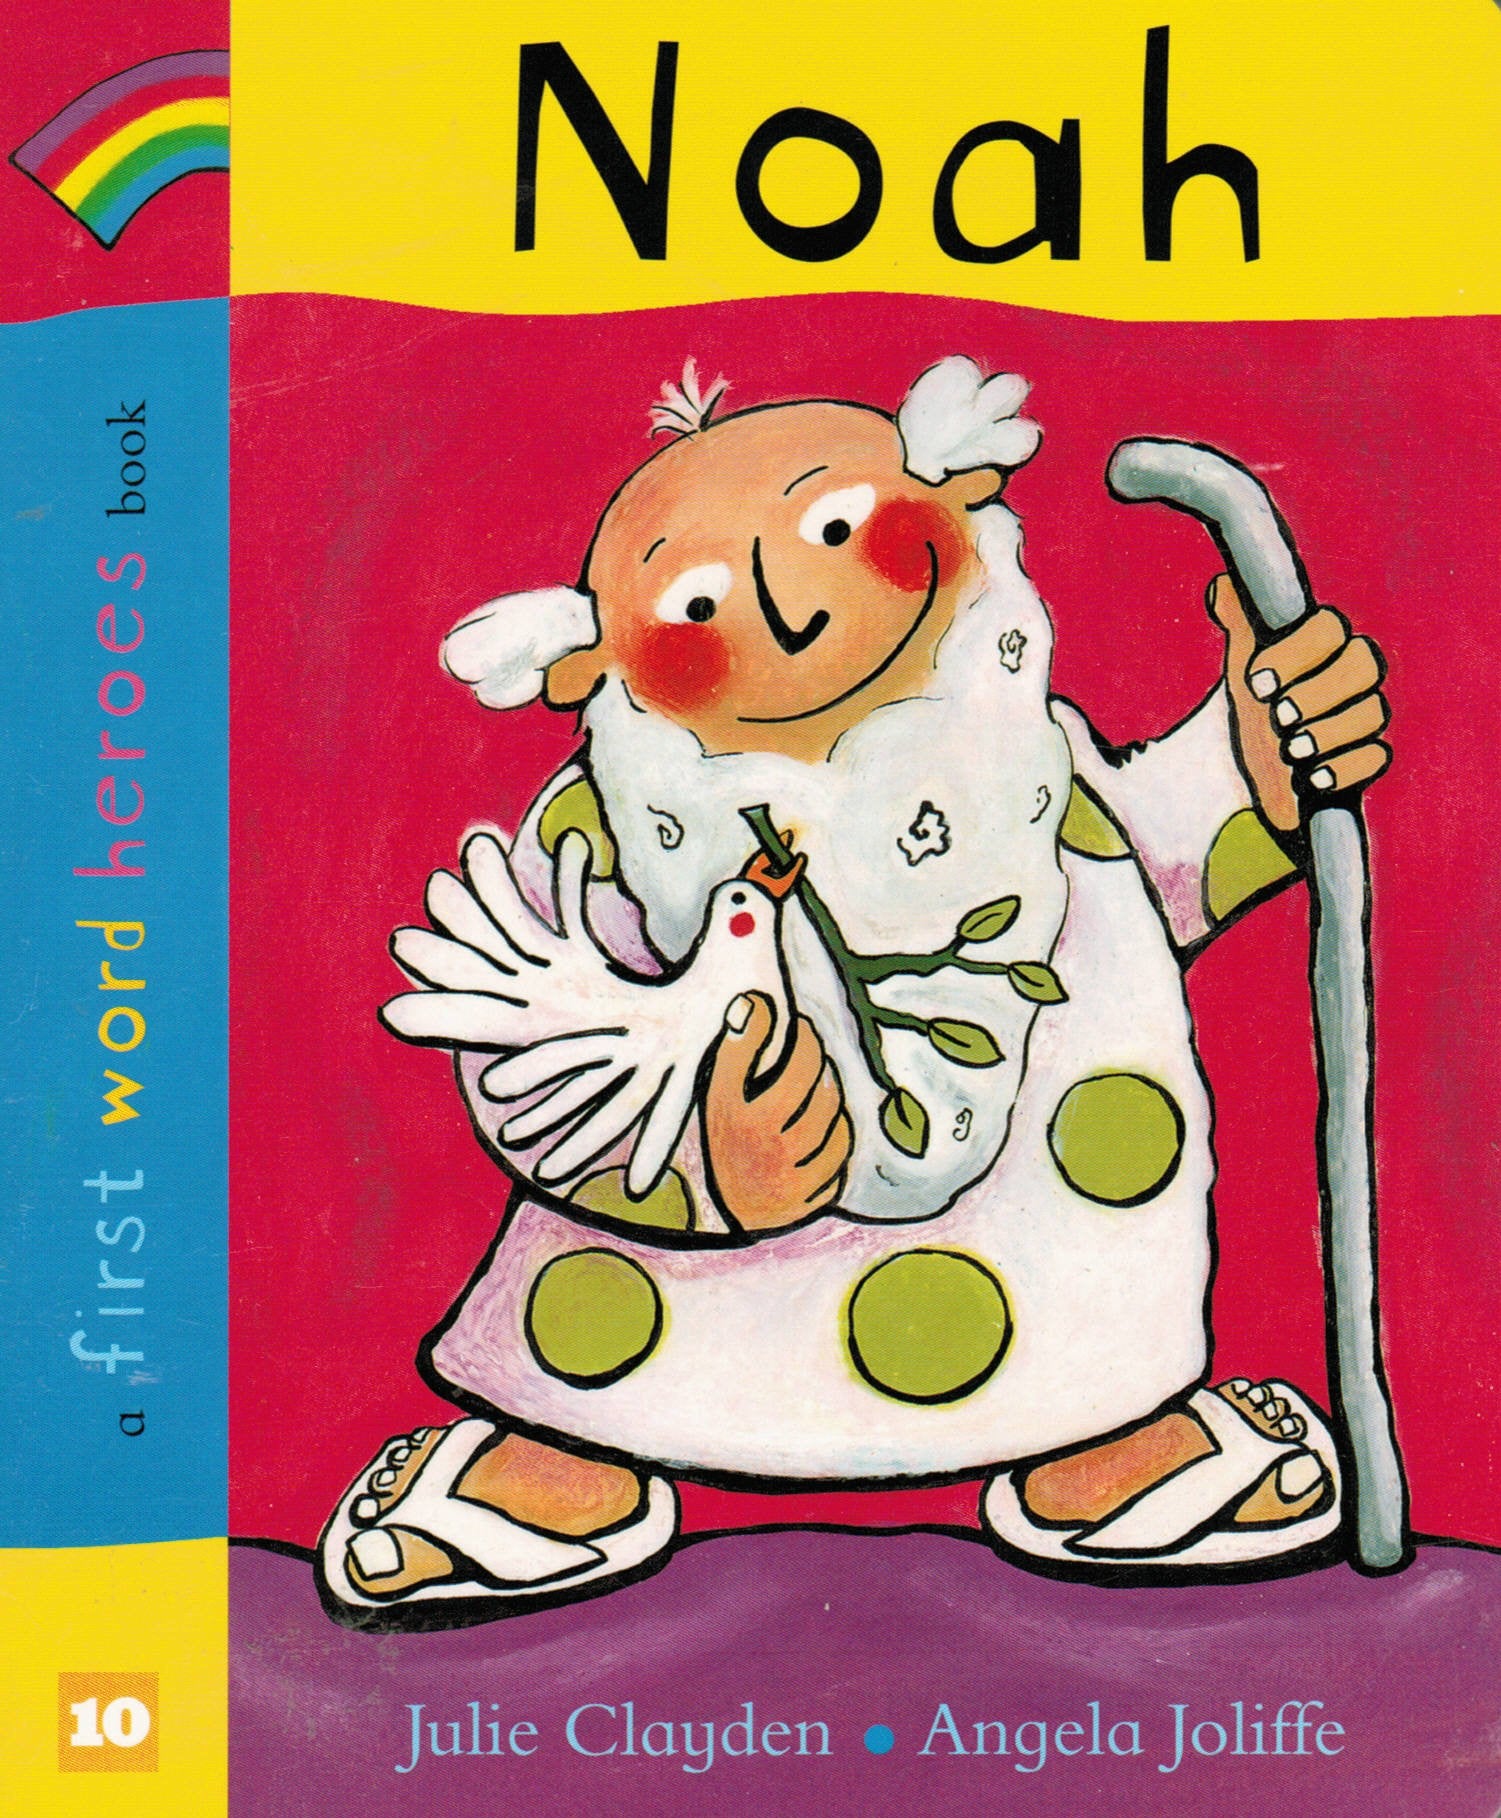 A First Word Heroes Book - Noah